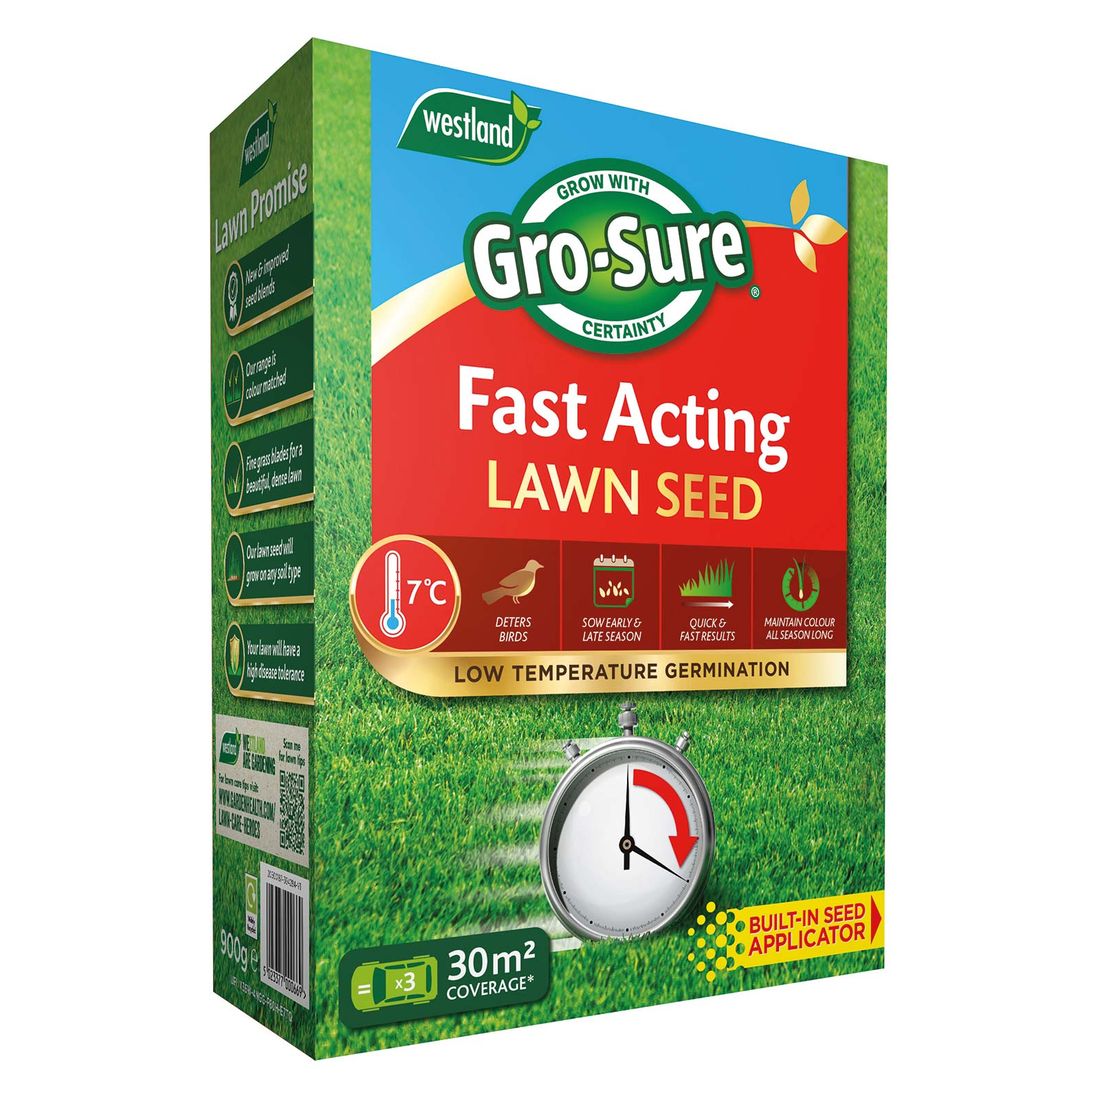 Gro-Sure Fa Lawn Seed Box 30M2 Fast Acting